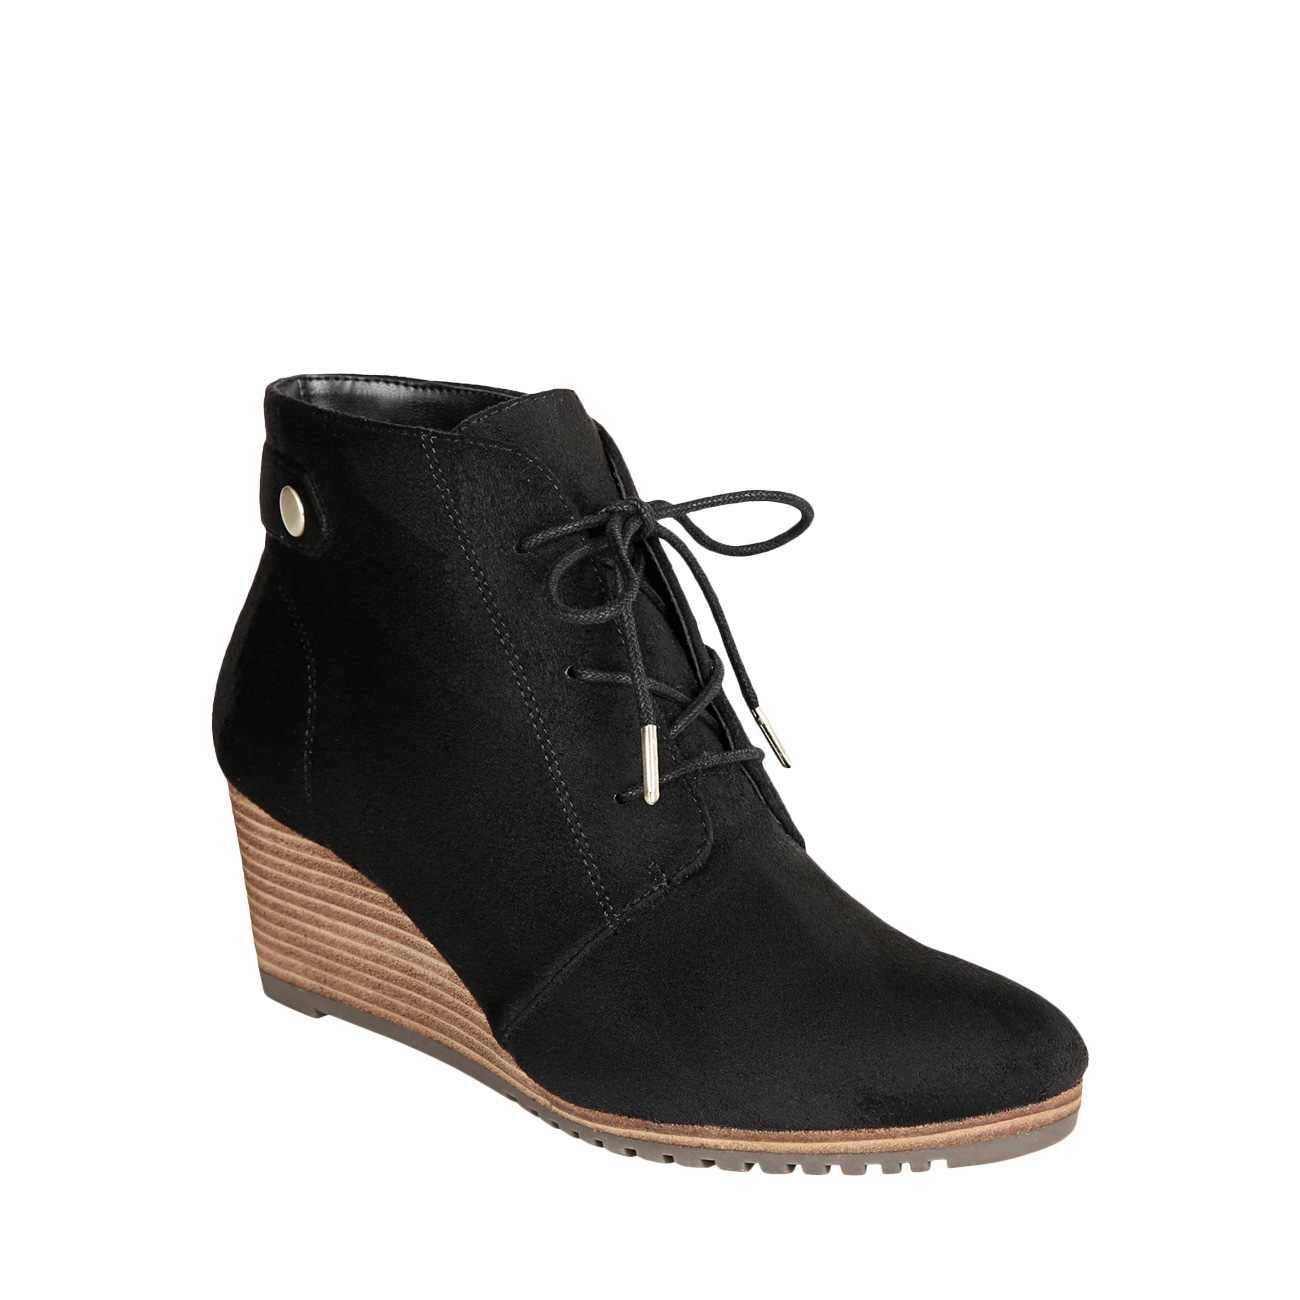 Scholls Shoes Womens Conquer Ankle Boot Dr